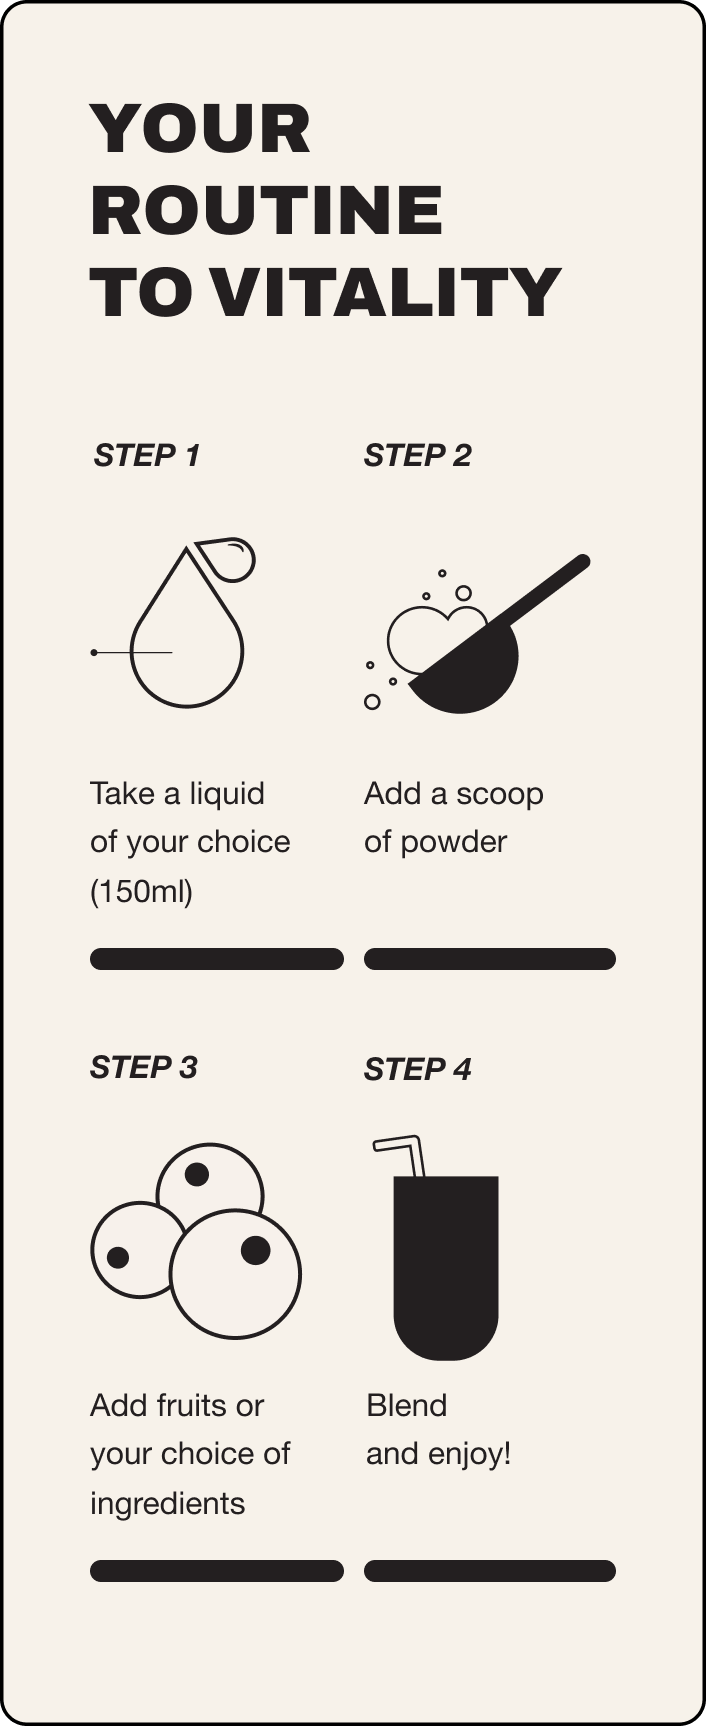 Your guide to Vitality. Step 1: Take a liquid of your choice (150ml). Step 2: Add a scoop of powder. Step 3: Add fruits or your choice of ingredients. Step 4: Blend and enjoy!